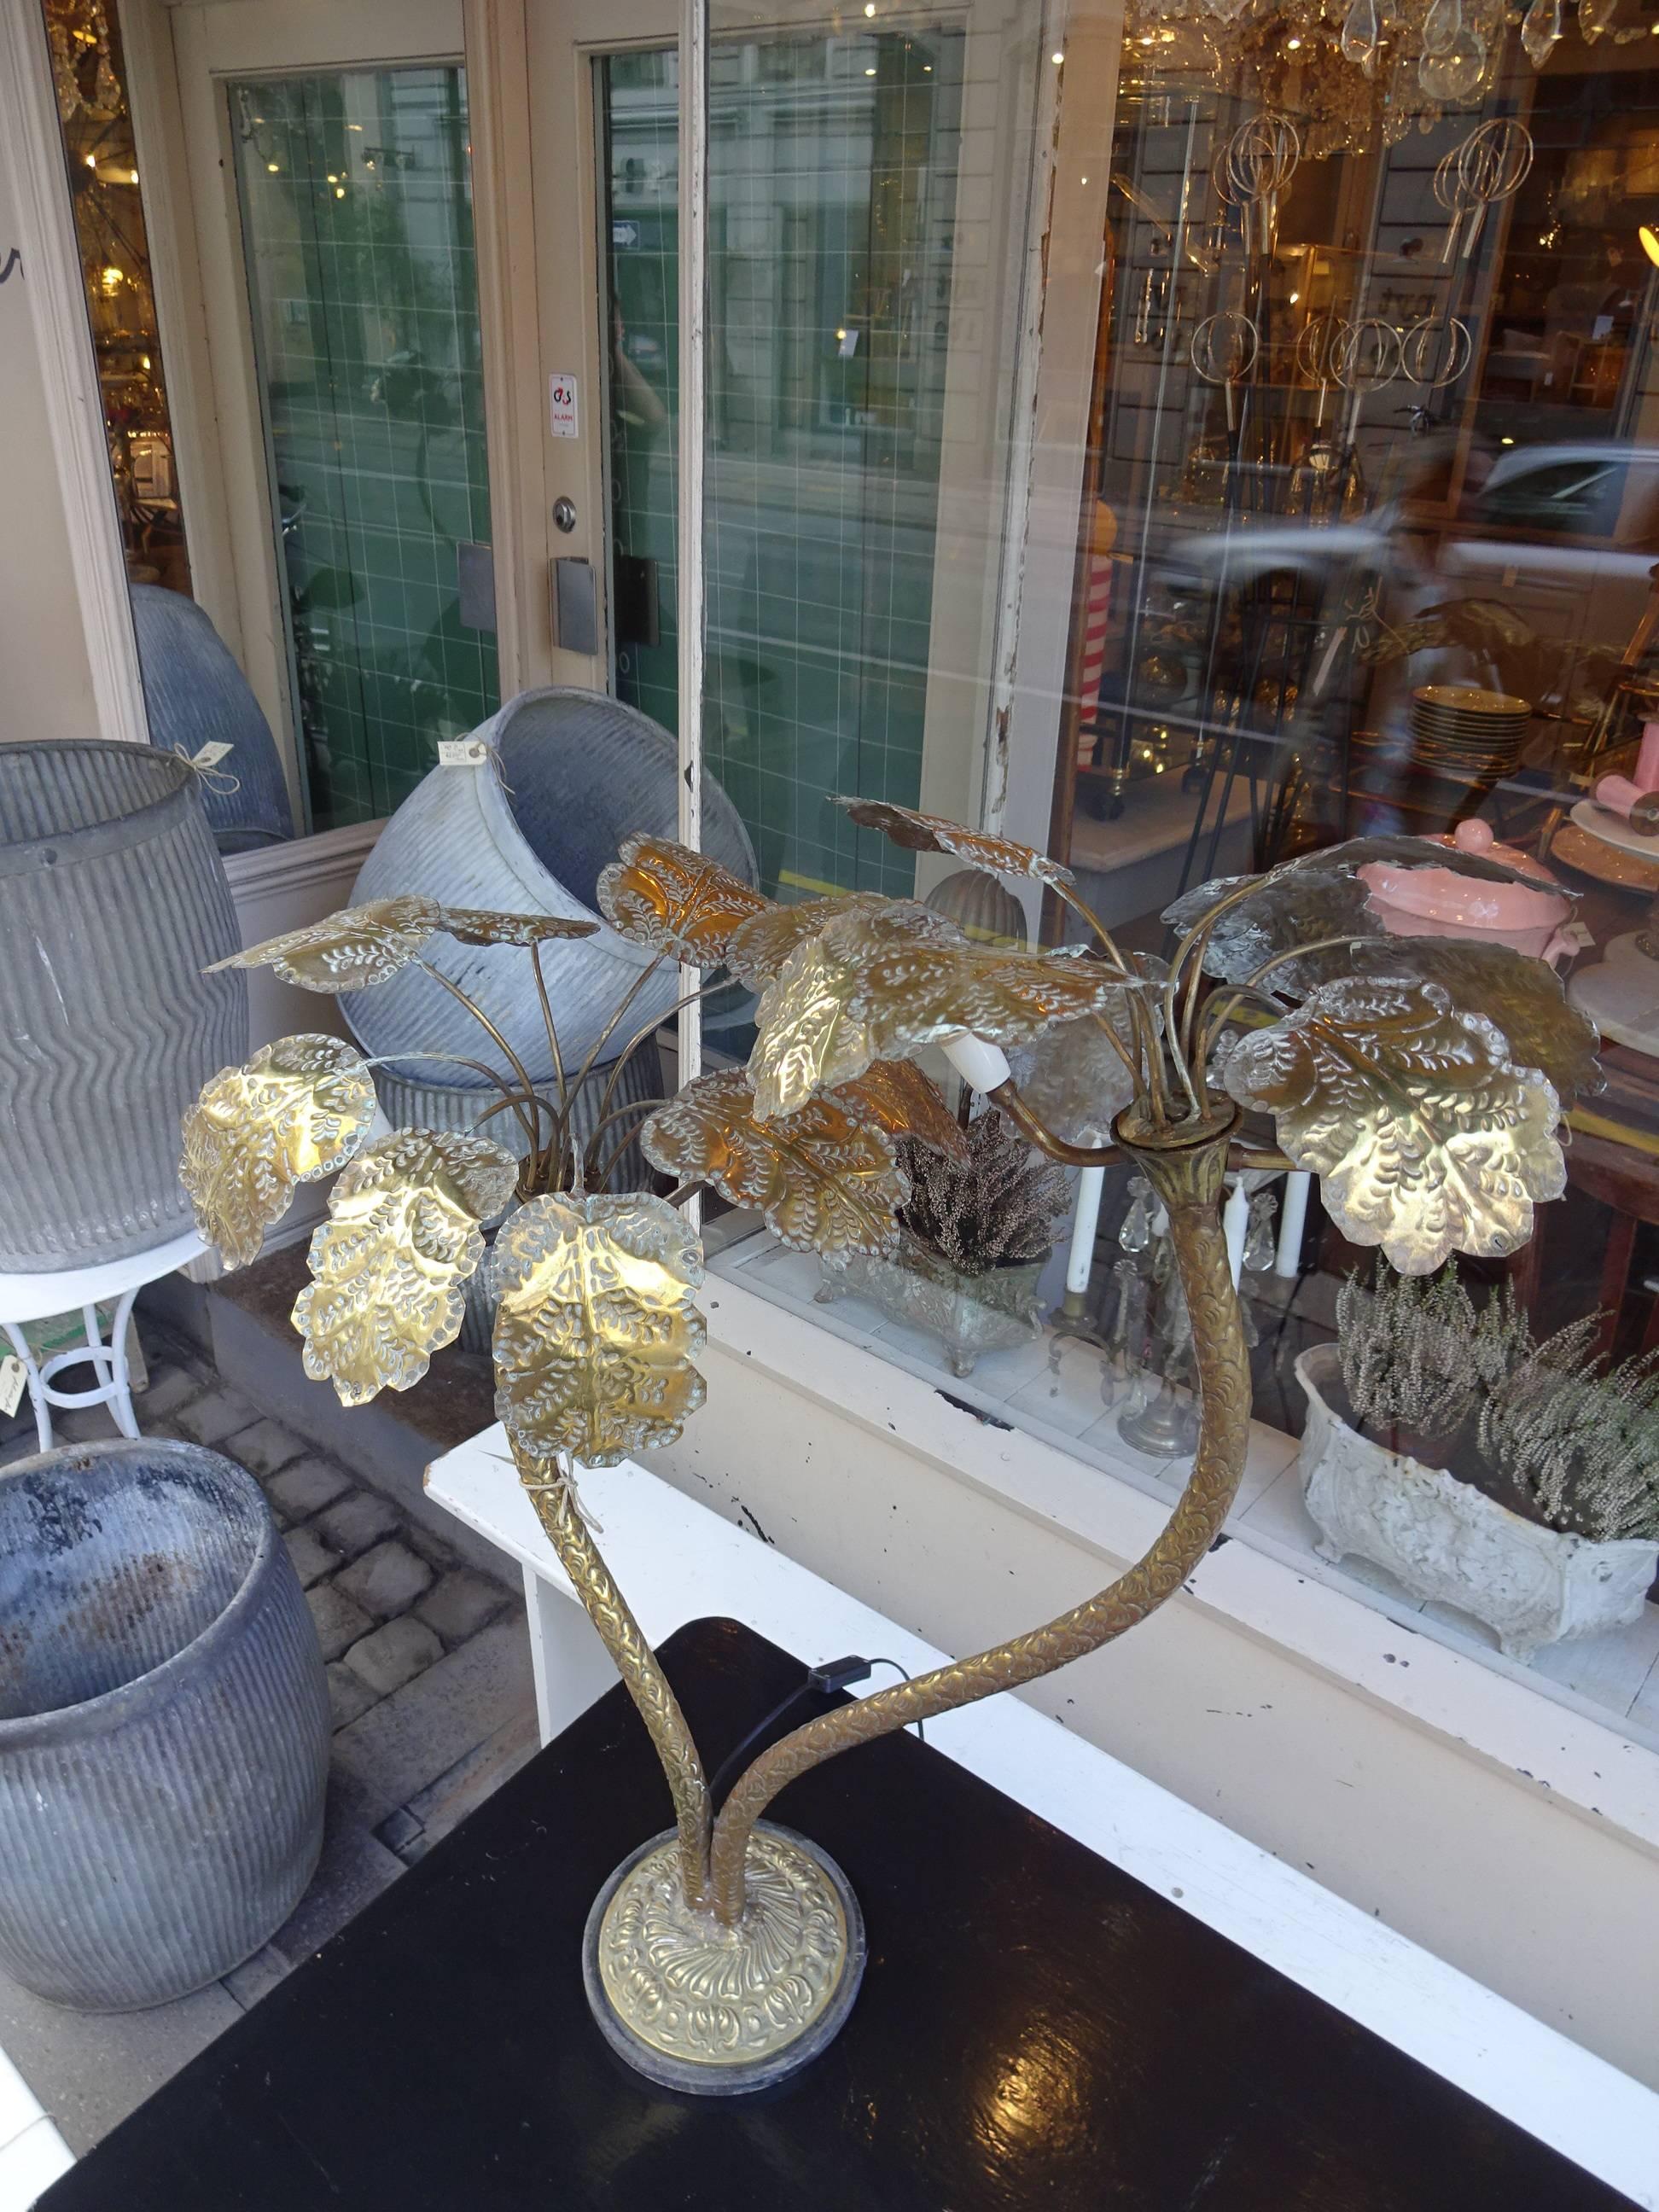 Spectacular old French floor or table lamp in brass and wood, with leafs and palm-like stems. Has a great oriental touch to it.